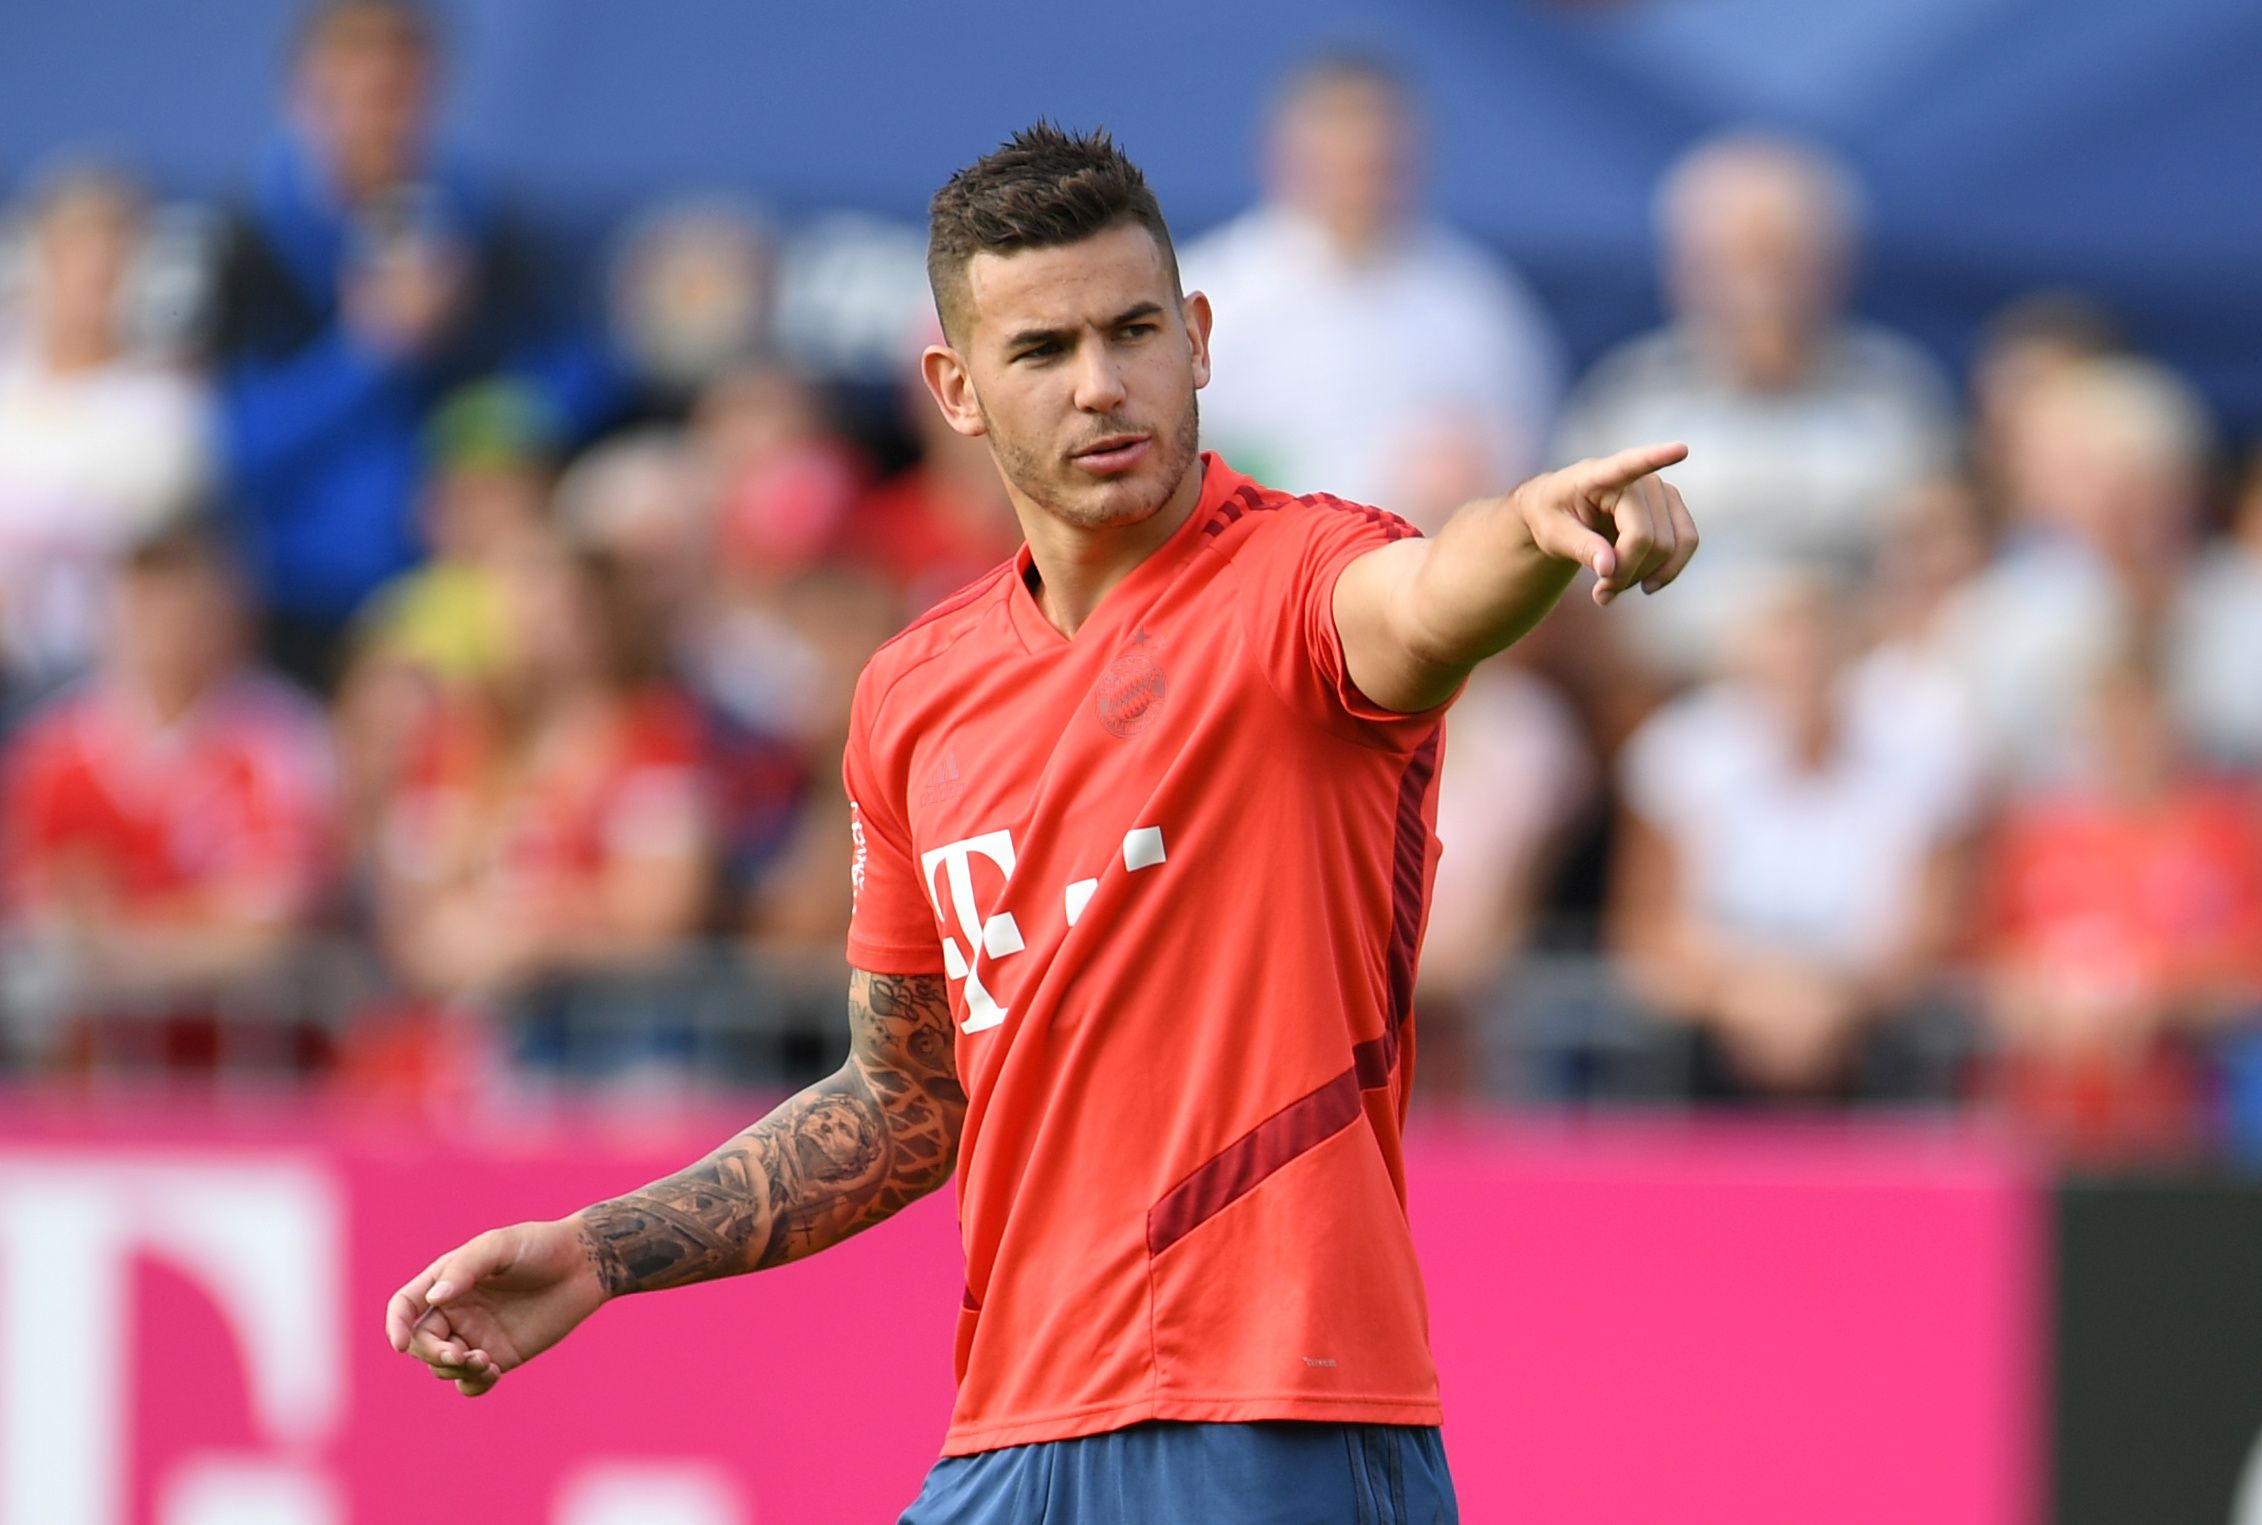  Lucas Hernandez during a match, he suffered an ACL injury during the match.